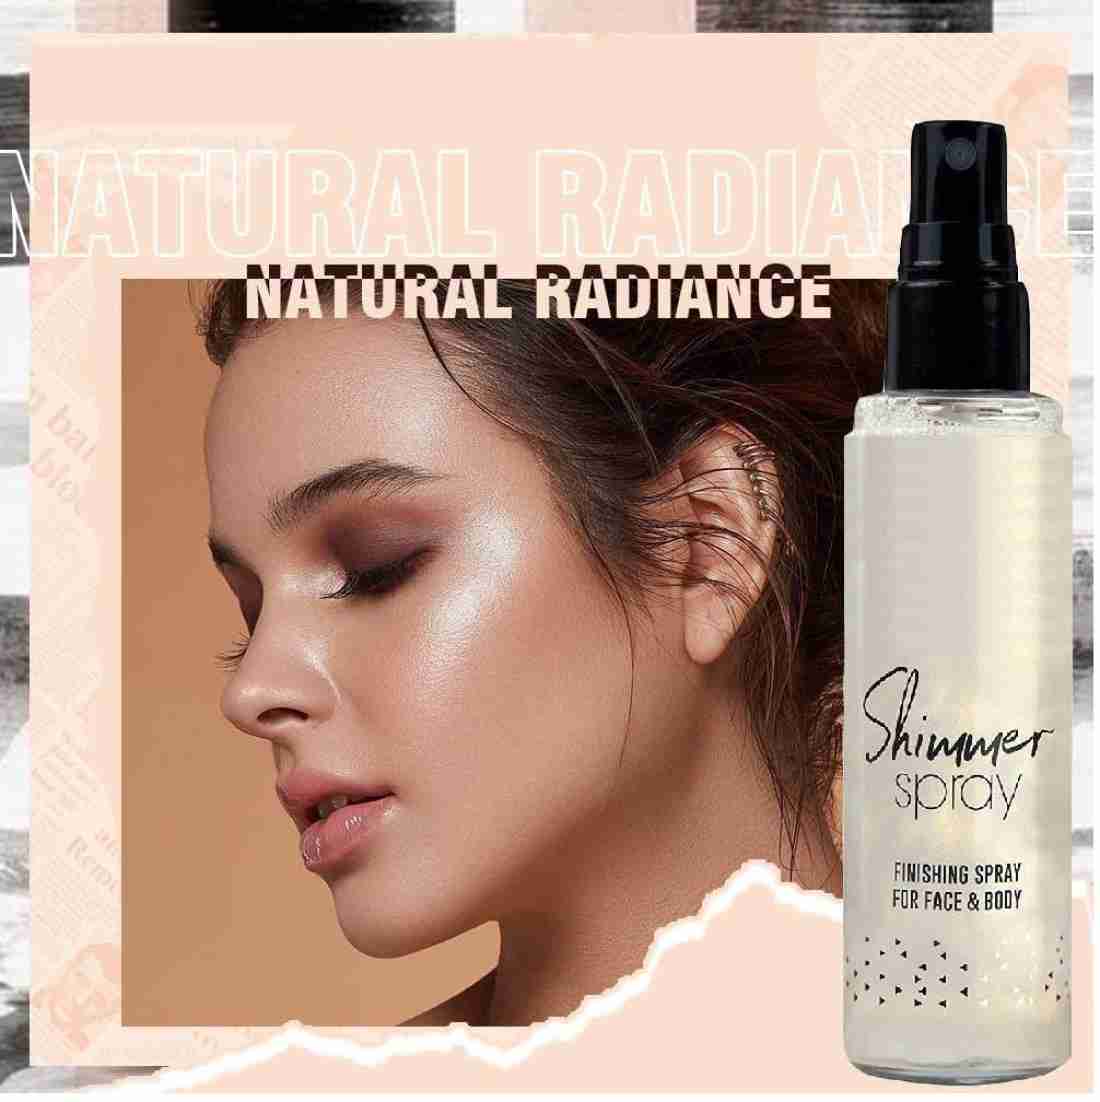 EVERERIN Silver Diamond Shiny Dust Glow Body Makeup Spray Highlighter -  Price in India, Buy EVERERIN Silver Diamond Shiny Dust Glow Body Makeup  Spray Highlighter Online In India, Reviews, Ratings & Features